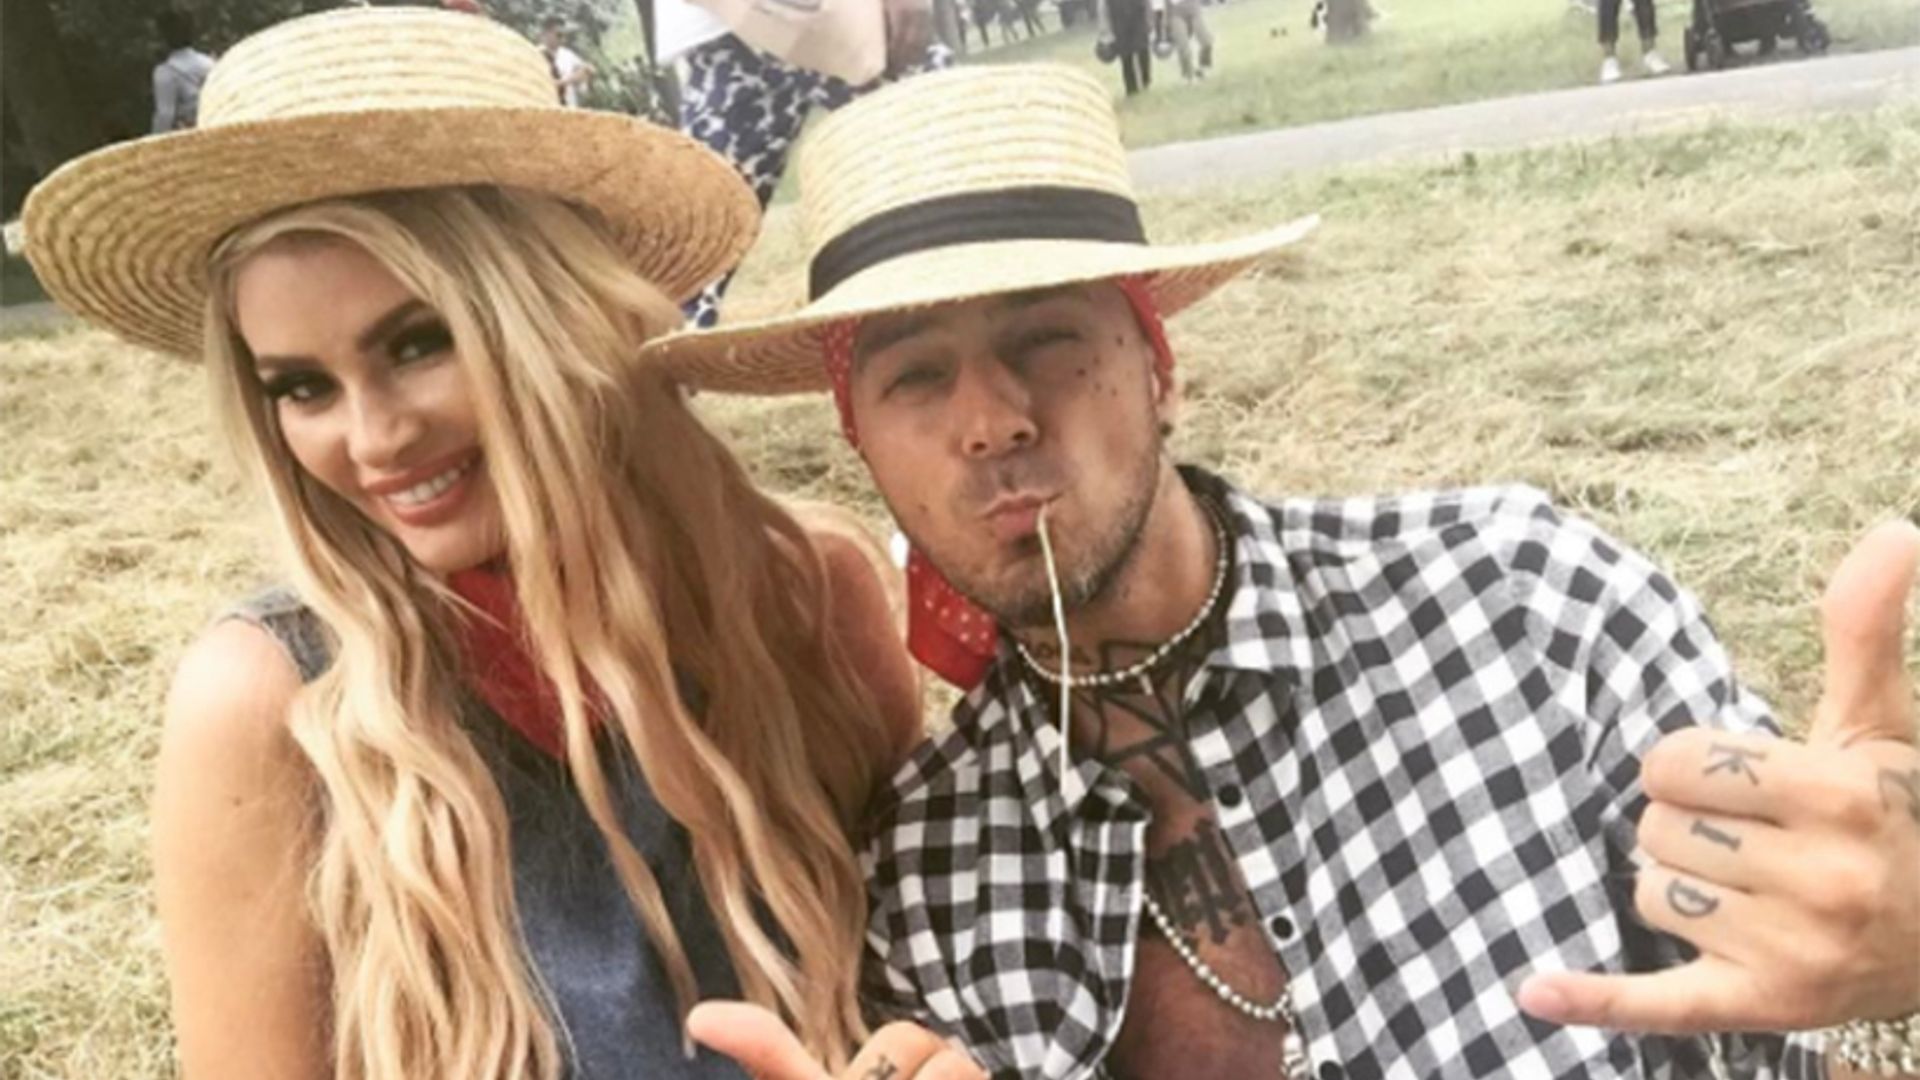 And just what have Chloe Sims and Elliot Wright been getting up to overseas?.